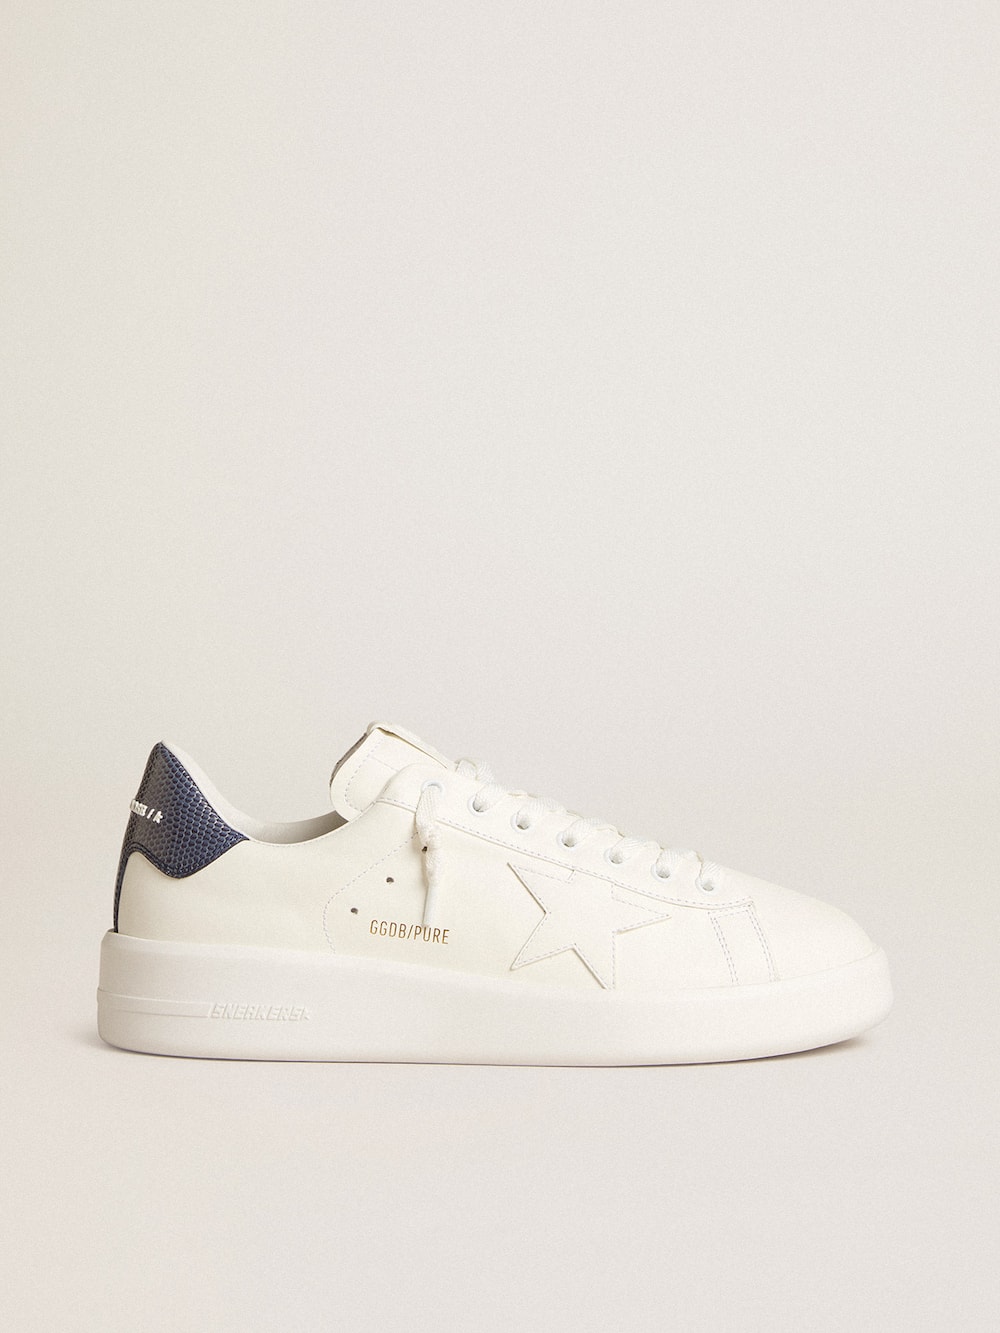 Golden Goose - Purestar in leather with white star and blue lizard leather heel tab in 